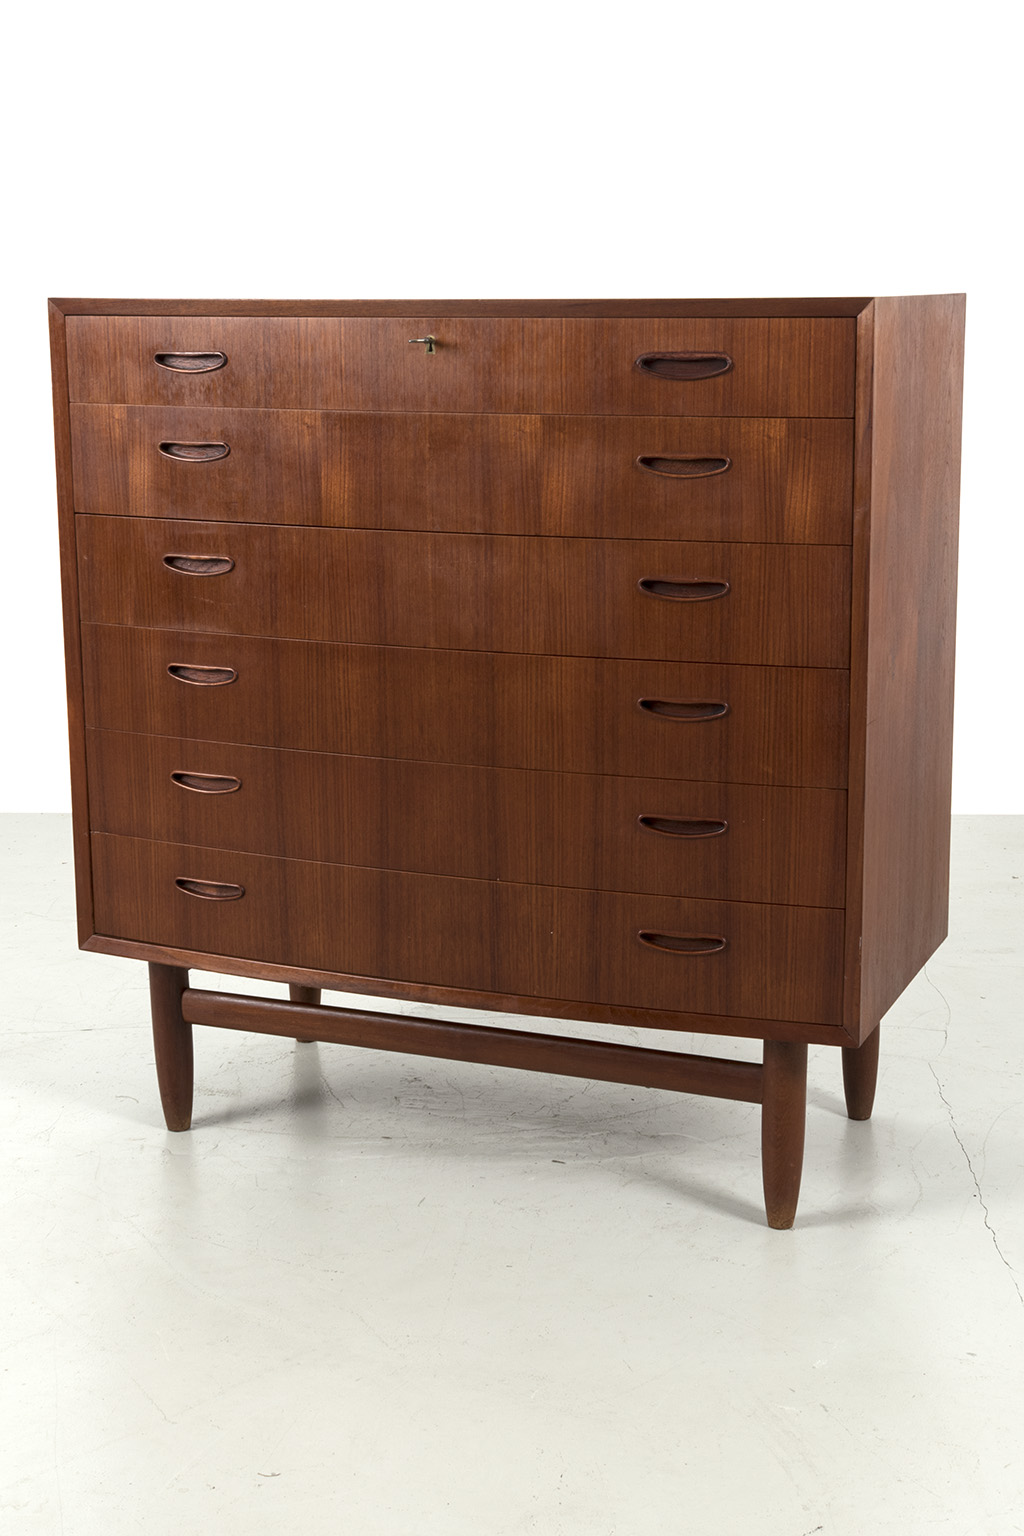 Stunning chest of drawers from Denmark